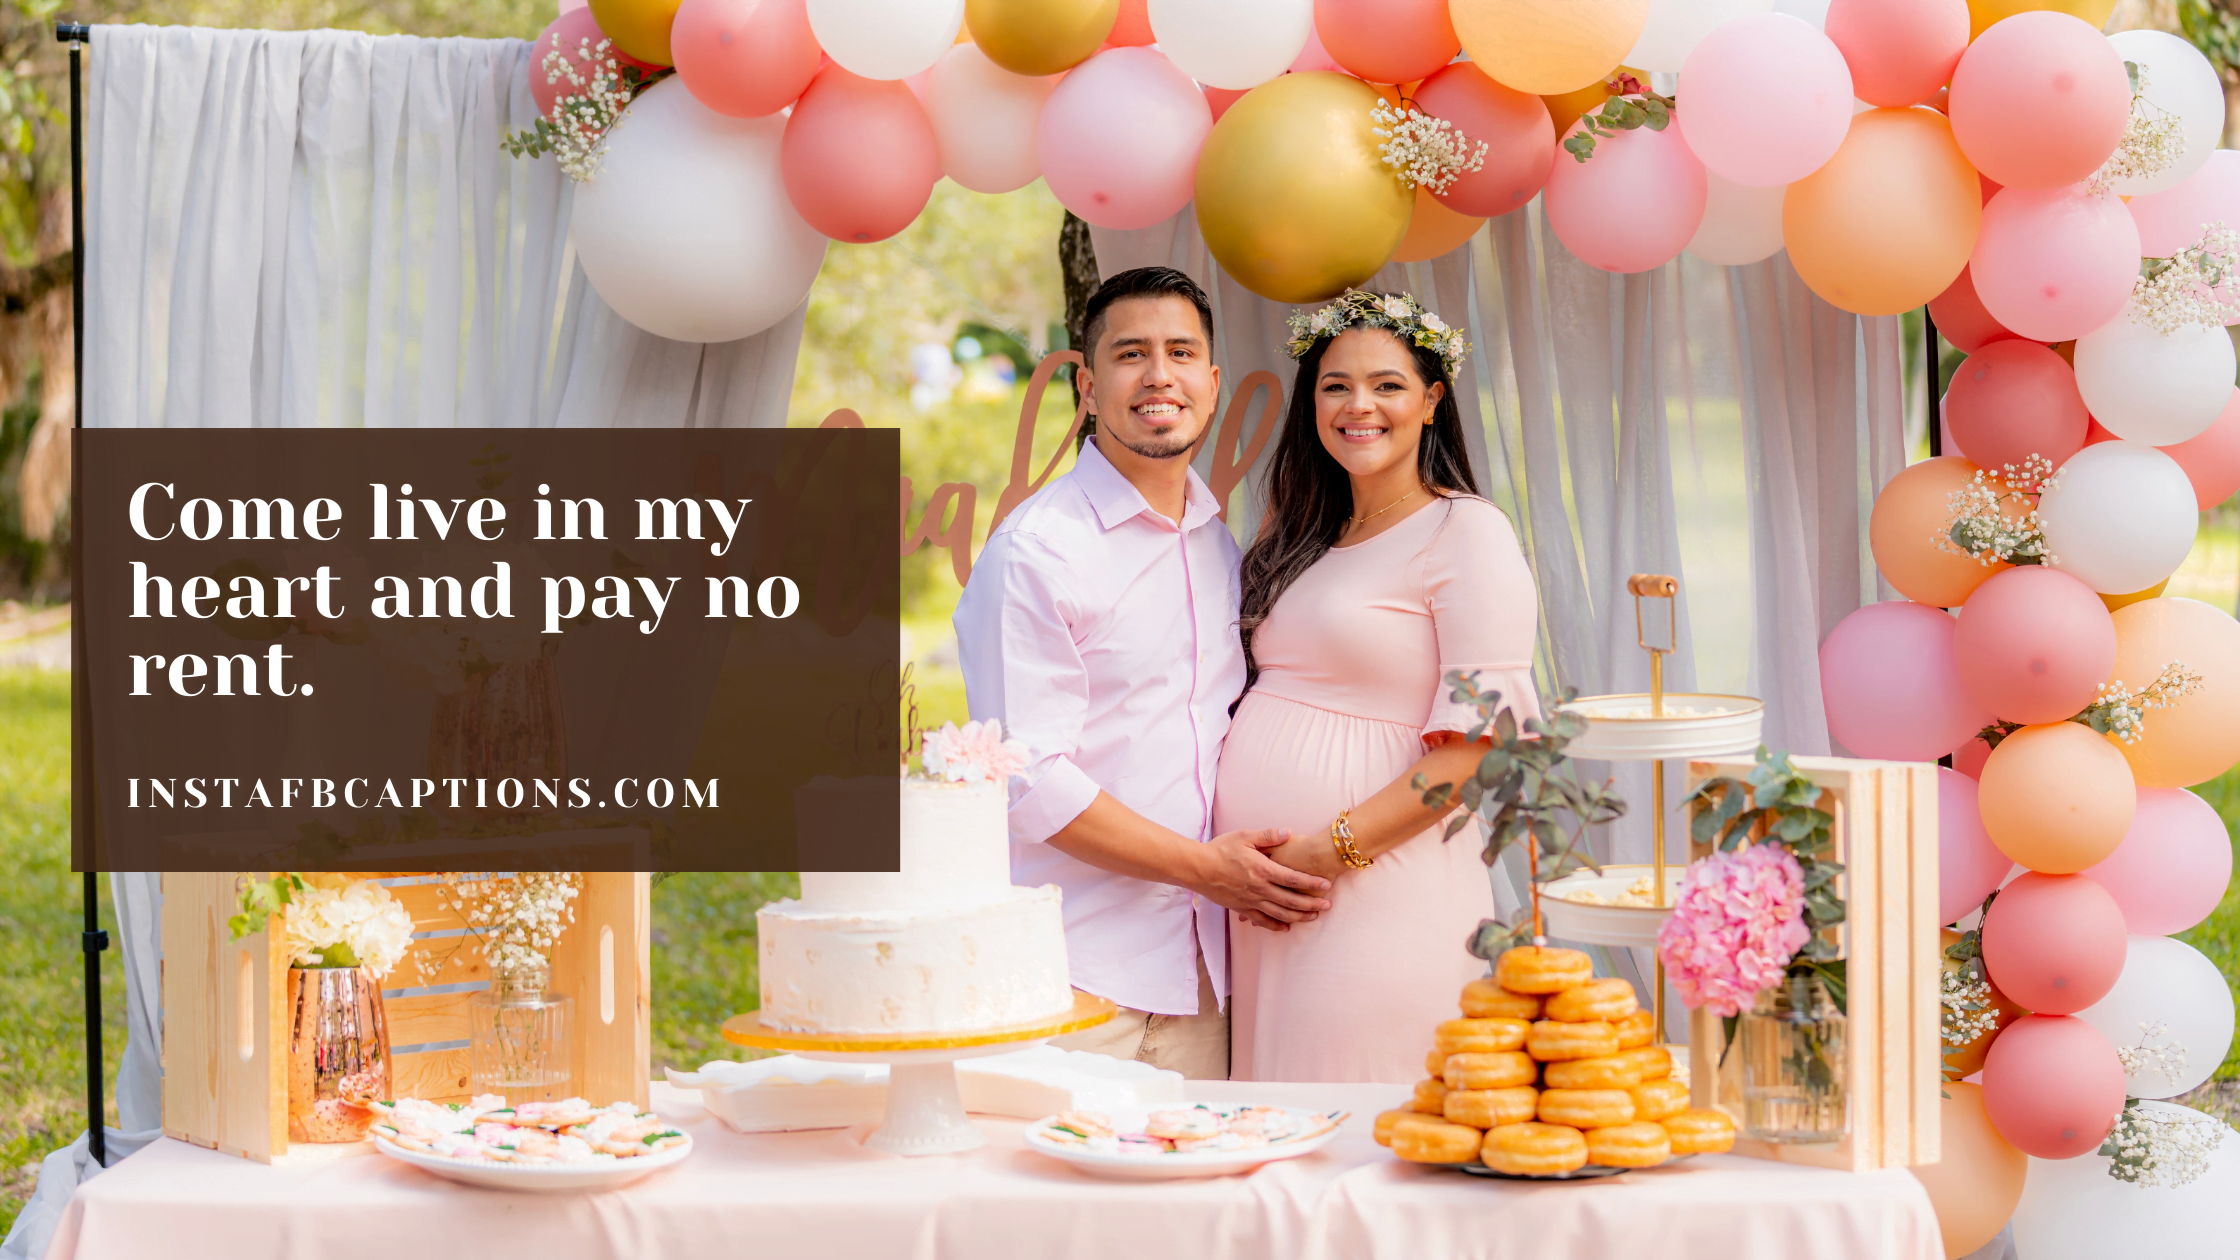 Baby Shower Captions  - Baby Shower Captions - KIDS Instagram Captions for Son and Daughter in 2022